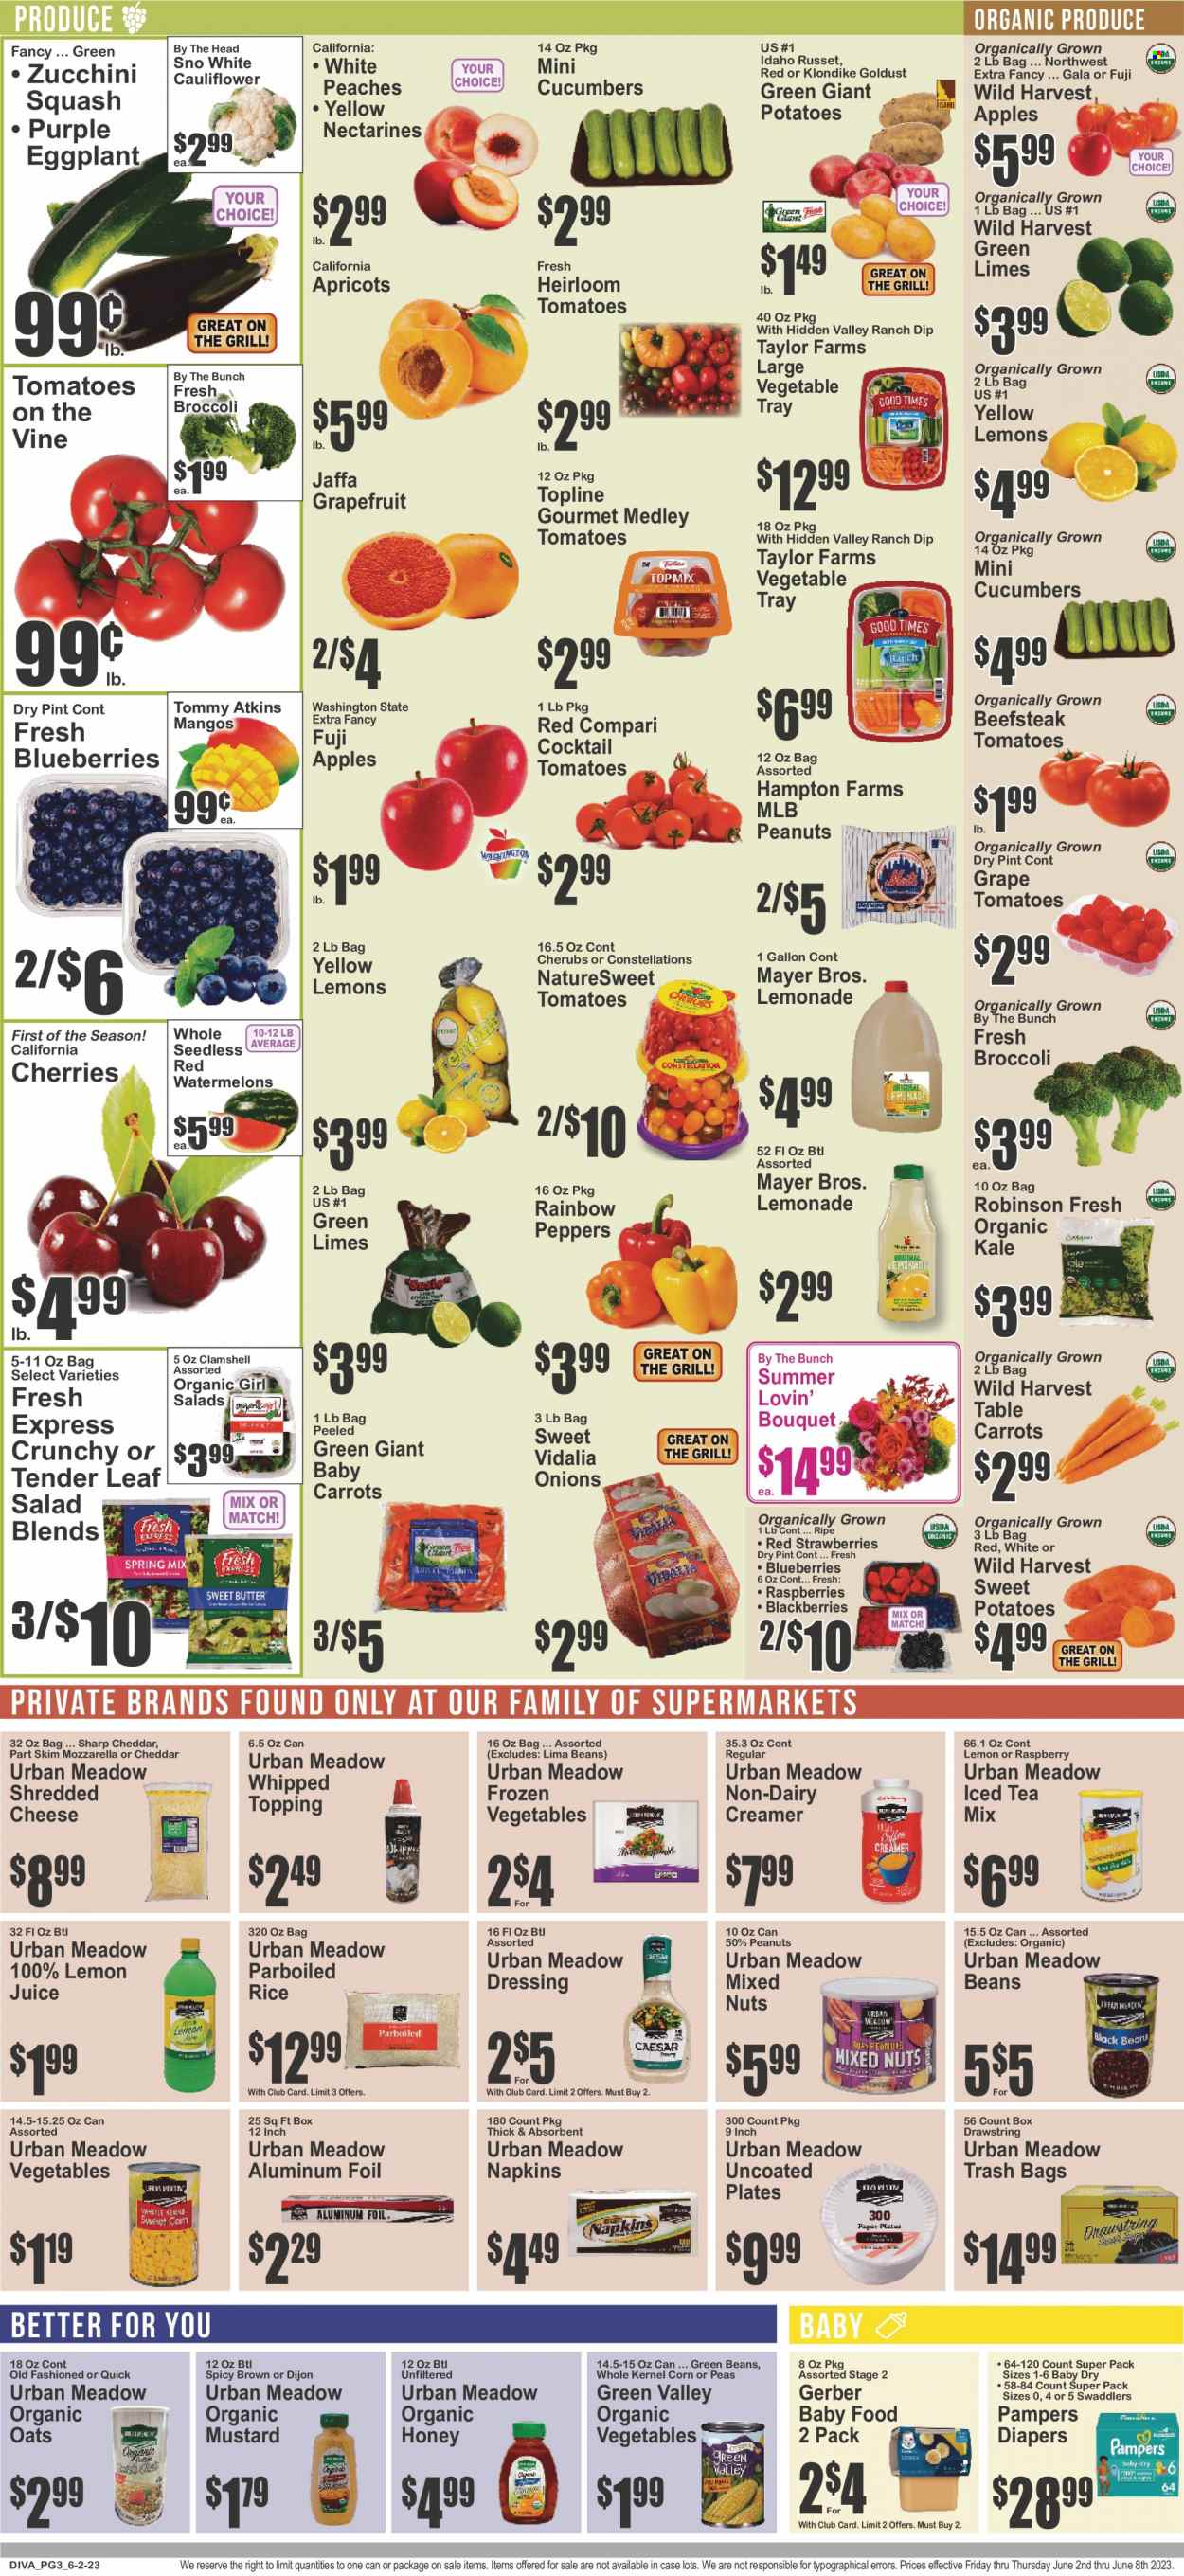 thumbnail - Food Dynasty Flyer - 06/02/2023 - 06/08/2023 - Sales products - beans, broccoli, carrots, corn, cucumber, green beans, russet potatoes, sweet potato, tomatoes, zucchini, kale, potatoes, peas, onion, peppers, eggplant, Wild Harvest, blackberries, Gala, grapefruits, limes, raspberries, strawberries, watermelon, cherries, Fuji apple, apricots, peaches, mozzarella, shredded cheese, non dairy creamer, creamer, dip, frozen vegetables, lima beans, Gerber, oats, topping, rice, parboiled rice, mustard, honey, peanuts, mixed nuts, lemonade, ice tea, lemon juice, cocktail, Pampers, napkins, nappies, trash bags, tray, plate, aluminium foil, grill, bouquet, nectarines. Page 3.